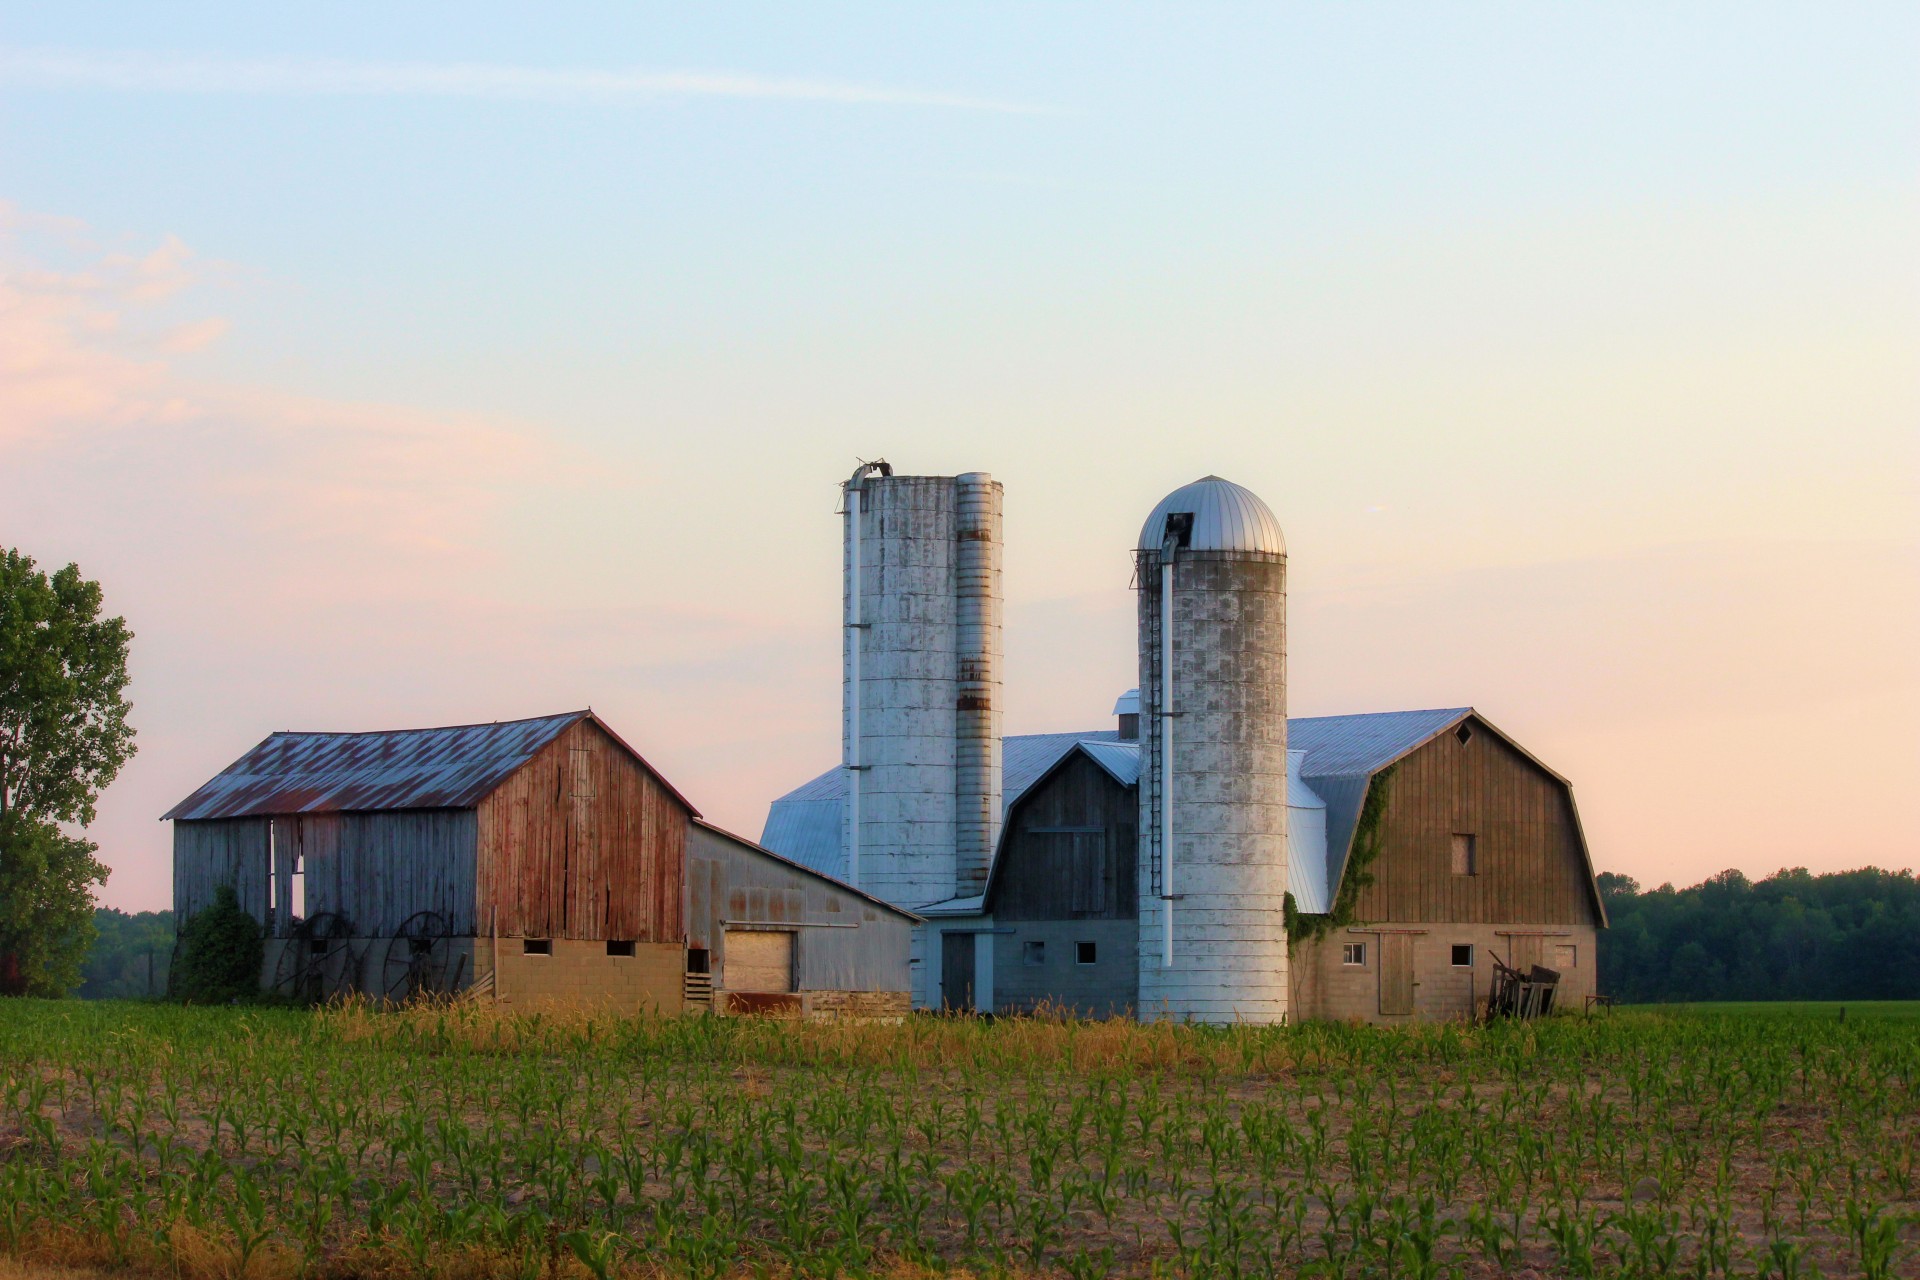 Farm in rural Michigan with silos, old barns, and a lot of planted produce.